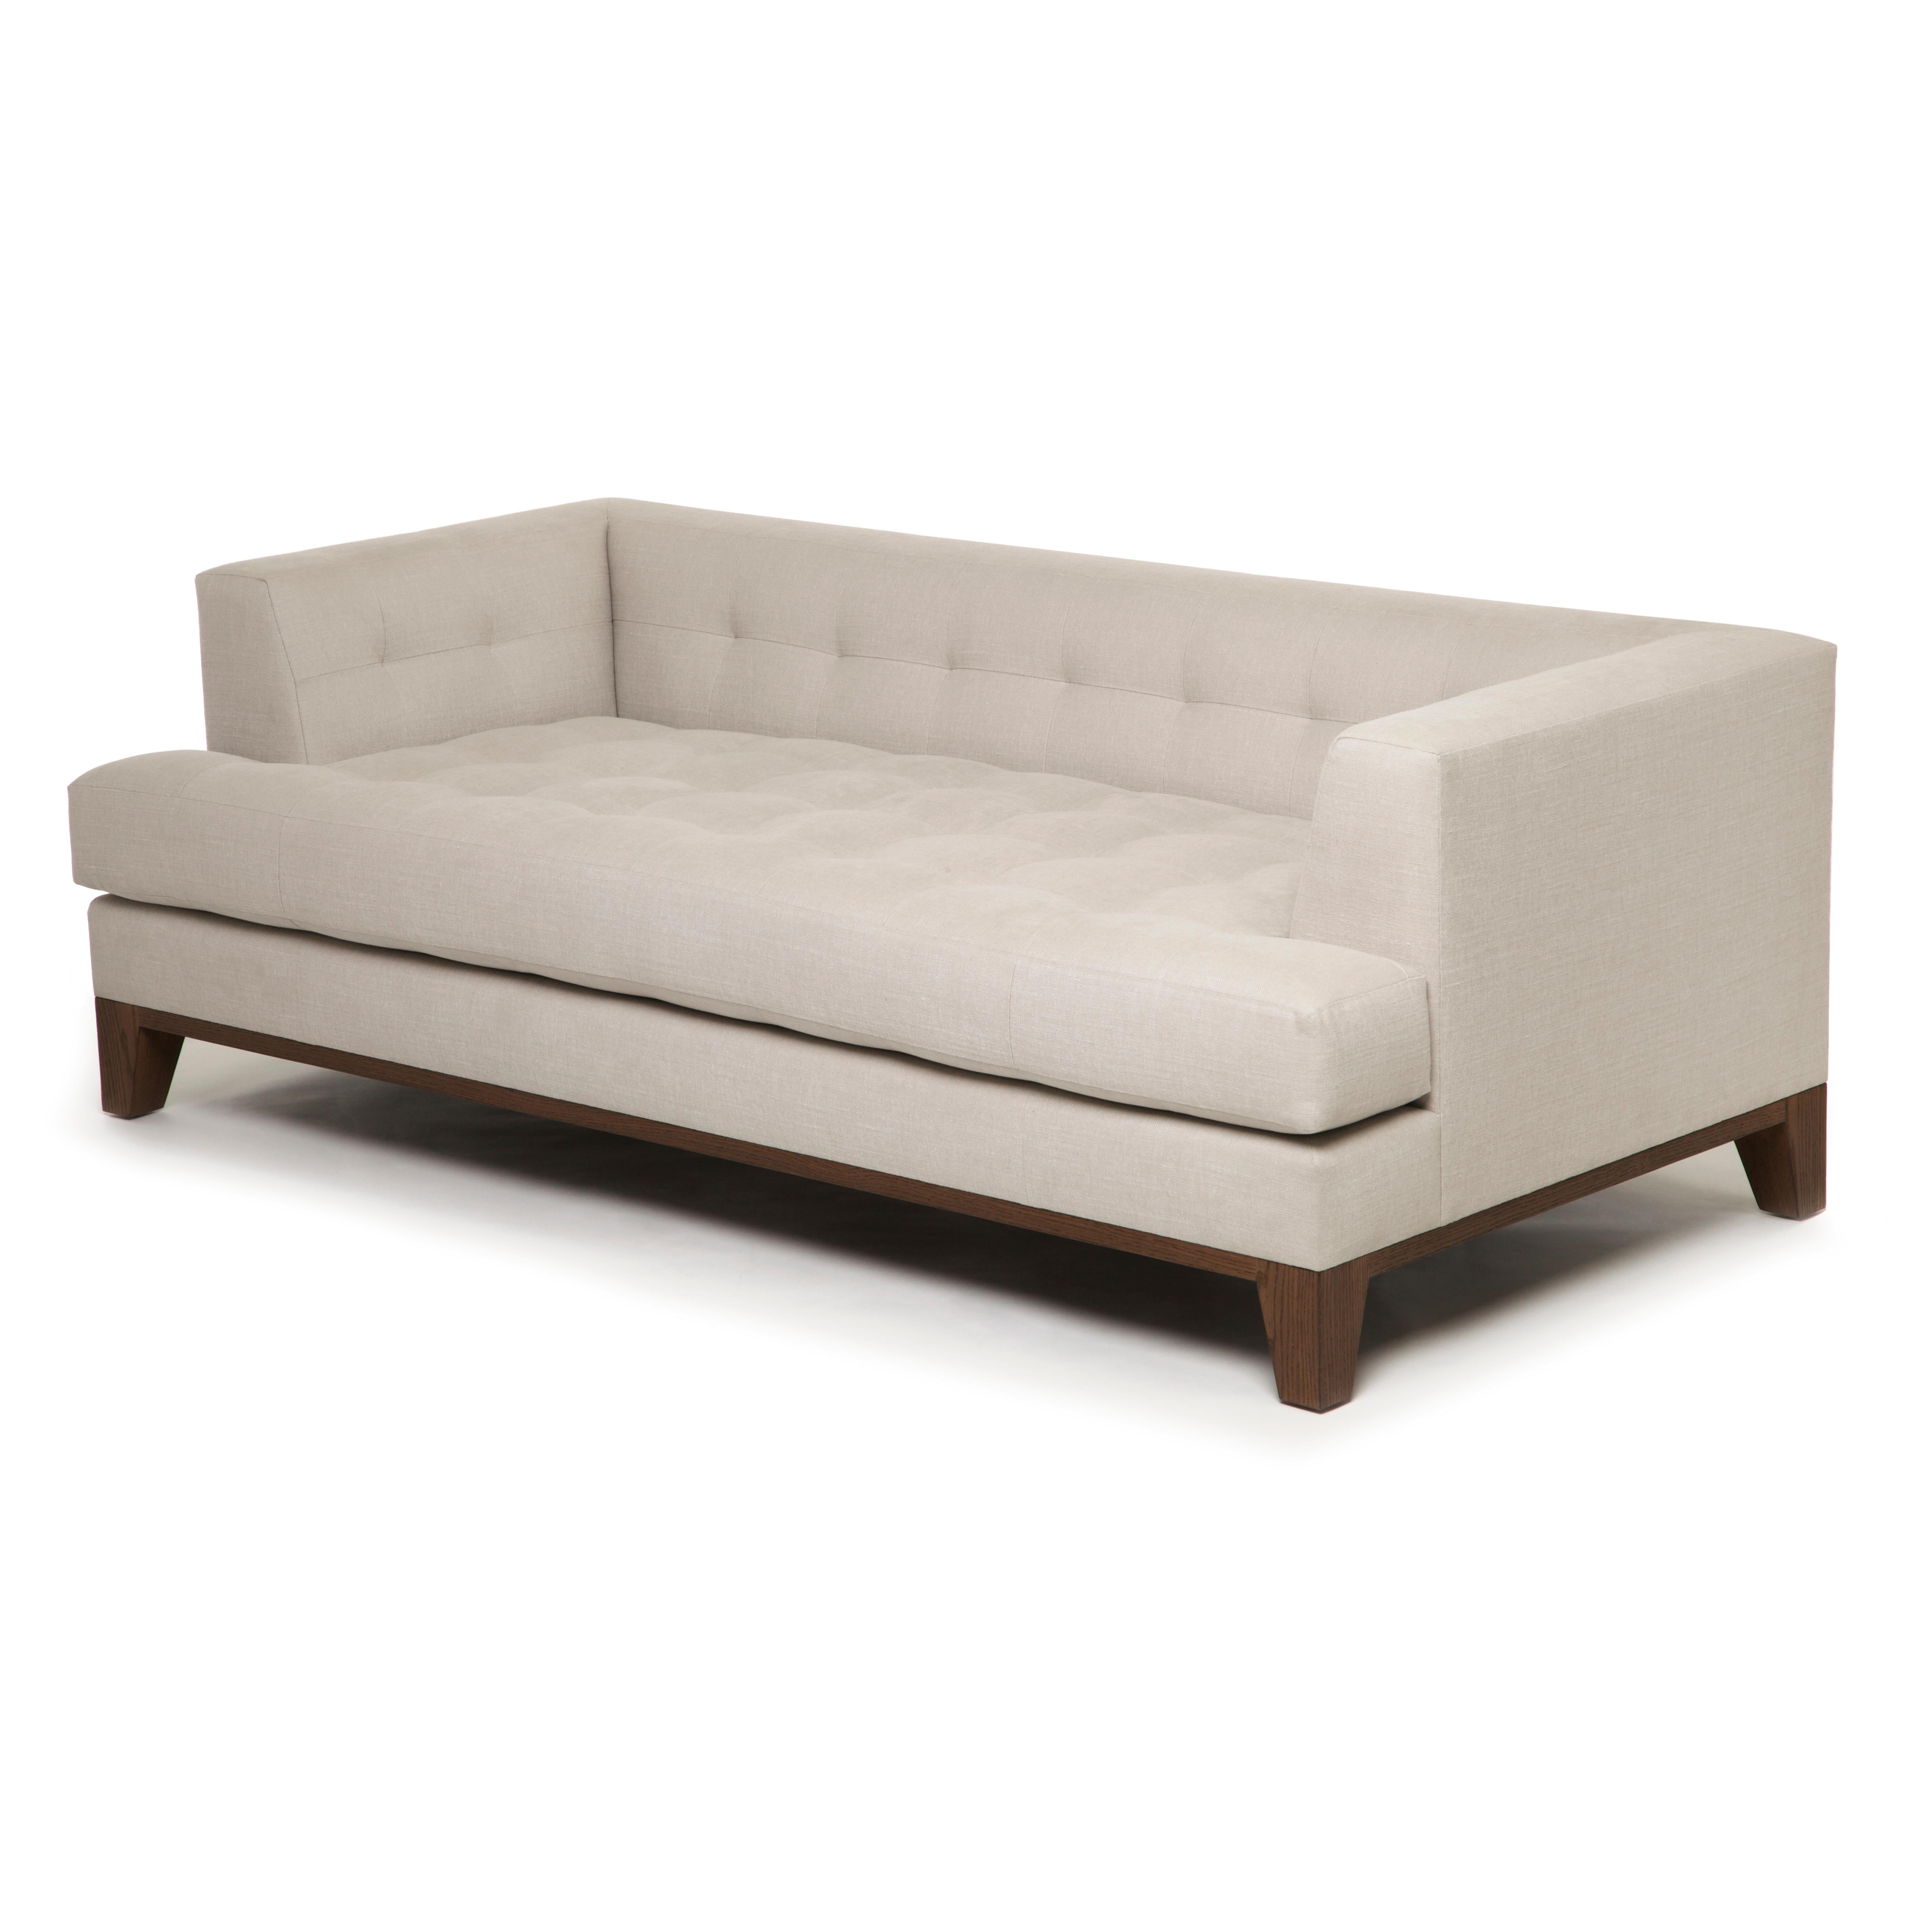 Chic and sophisticated, this sofa defines Naula’s Soho collection. With a low back and elegantly tufted seat, it is the intersection of modern and traditional.